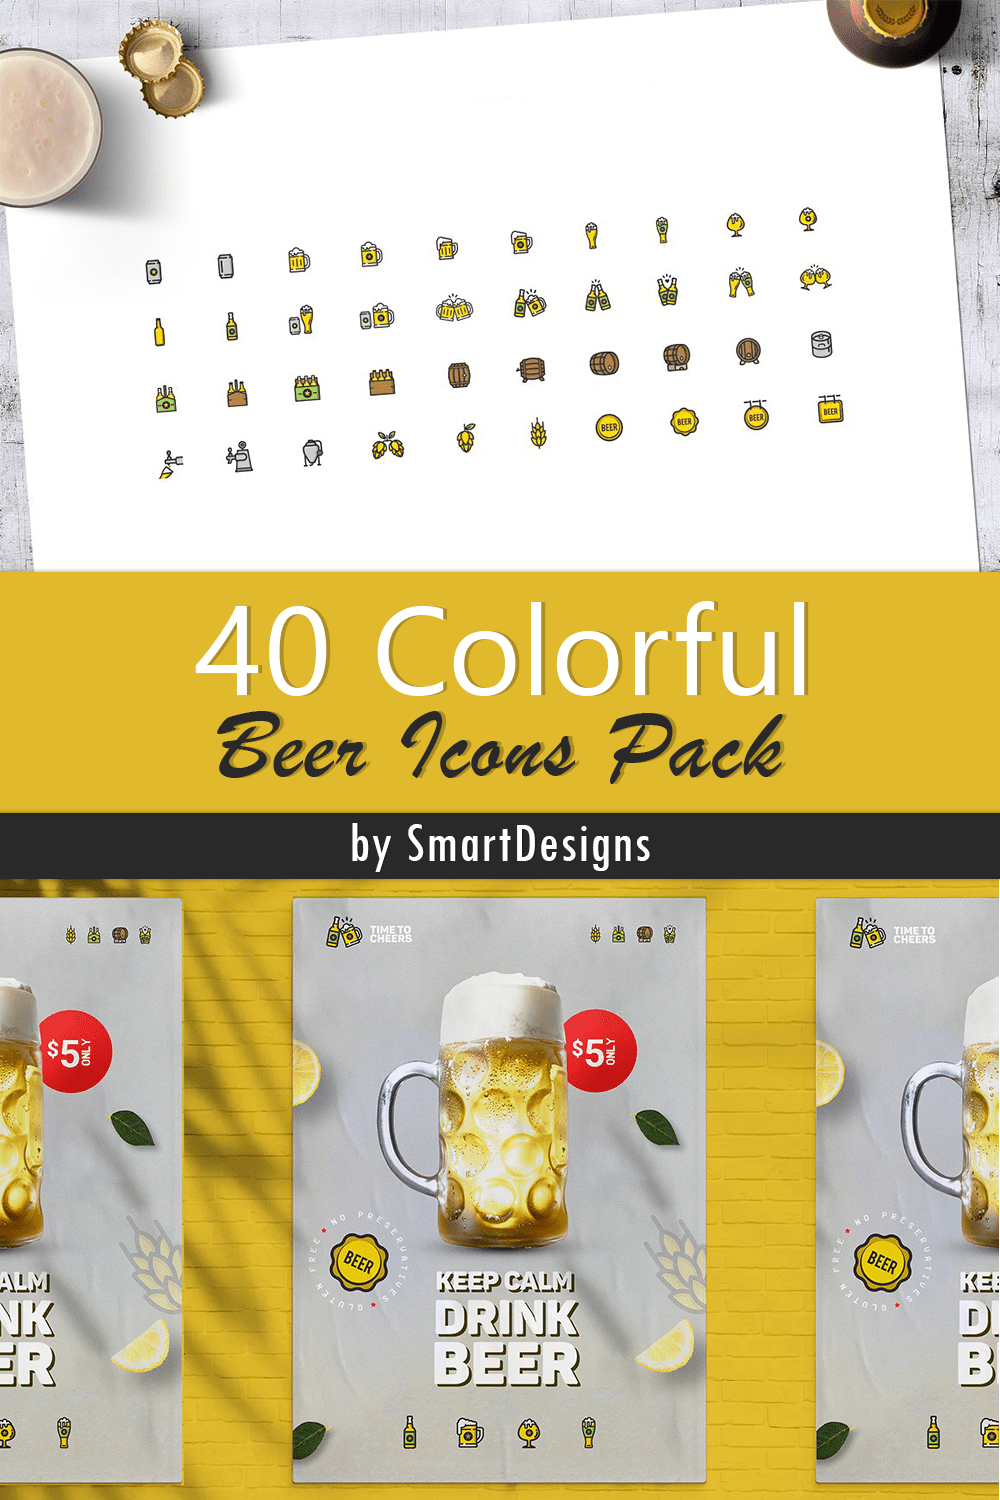 Colorful beer icons pack of pinterest.